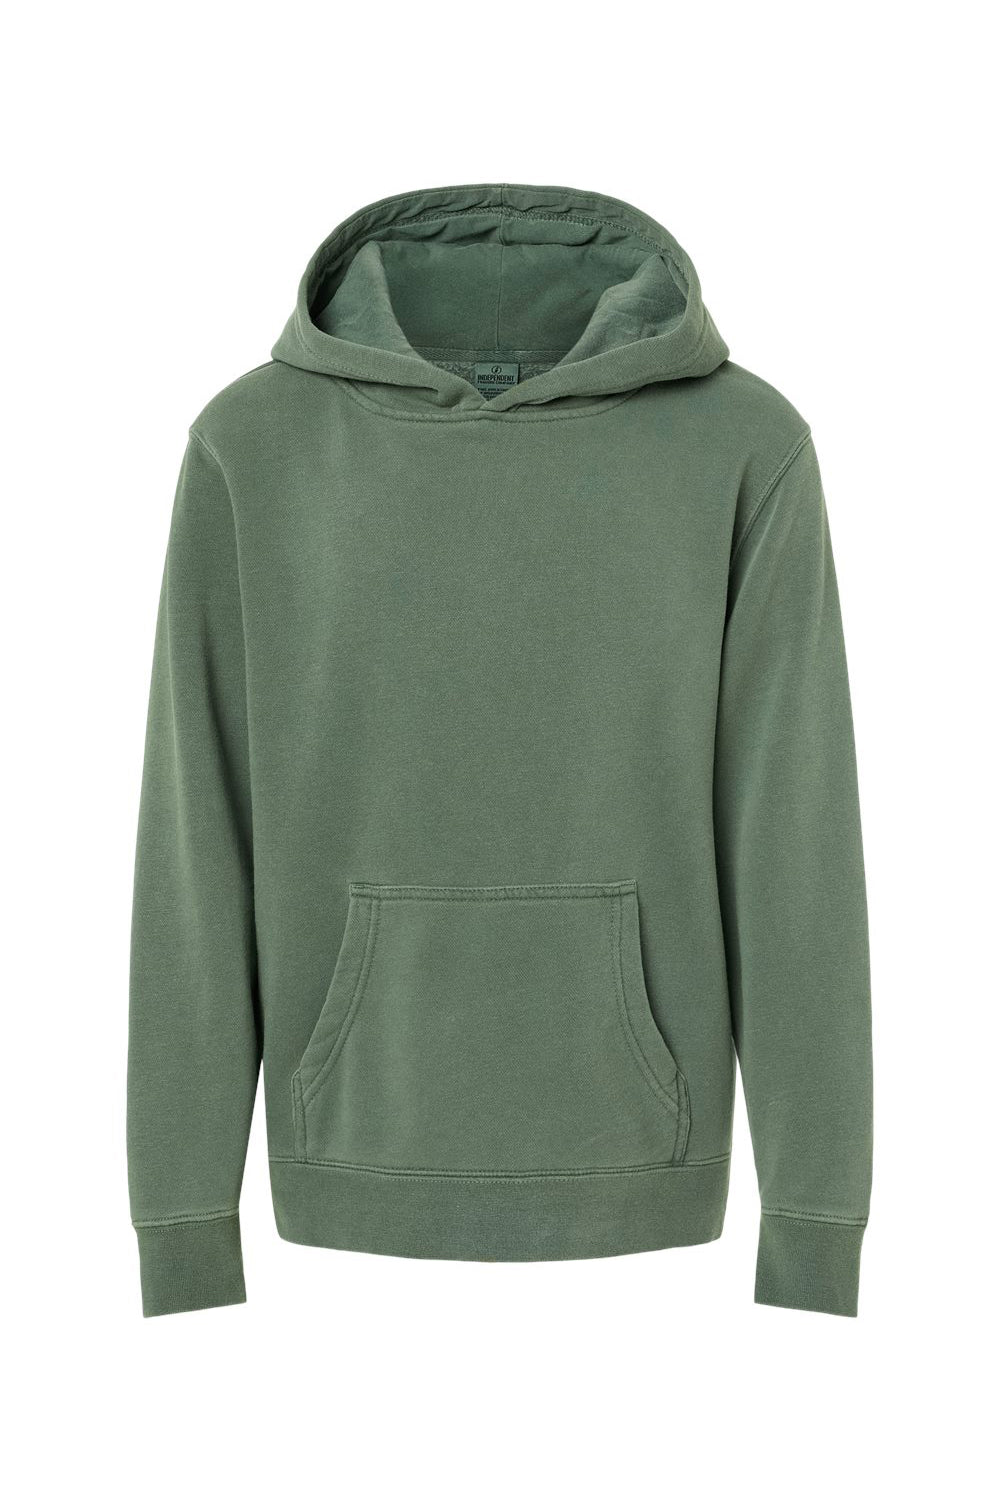 Independent Trading Co. PRM1500Y Youth Pigment Dyed Hooded Sweatshirt Hoodie Alpine Green Flat Front